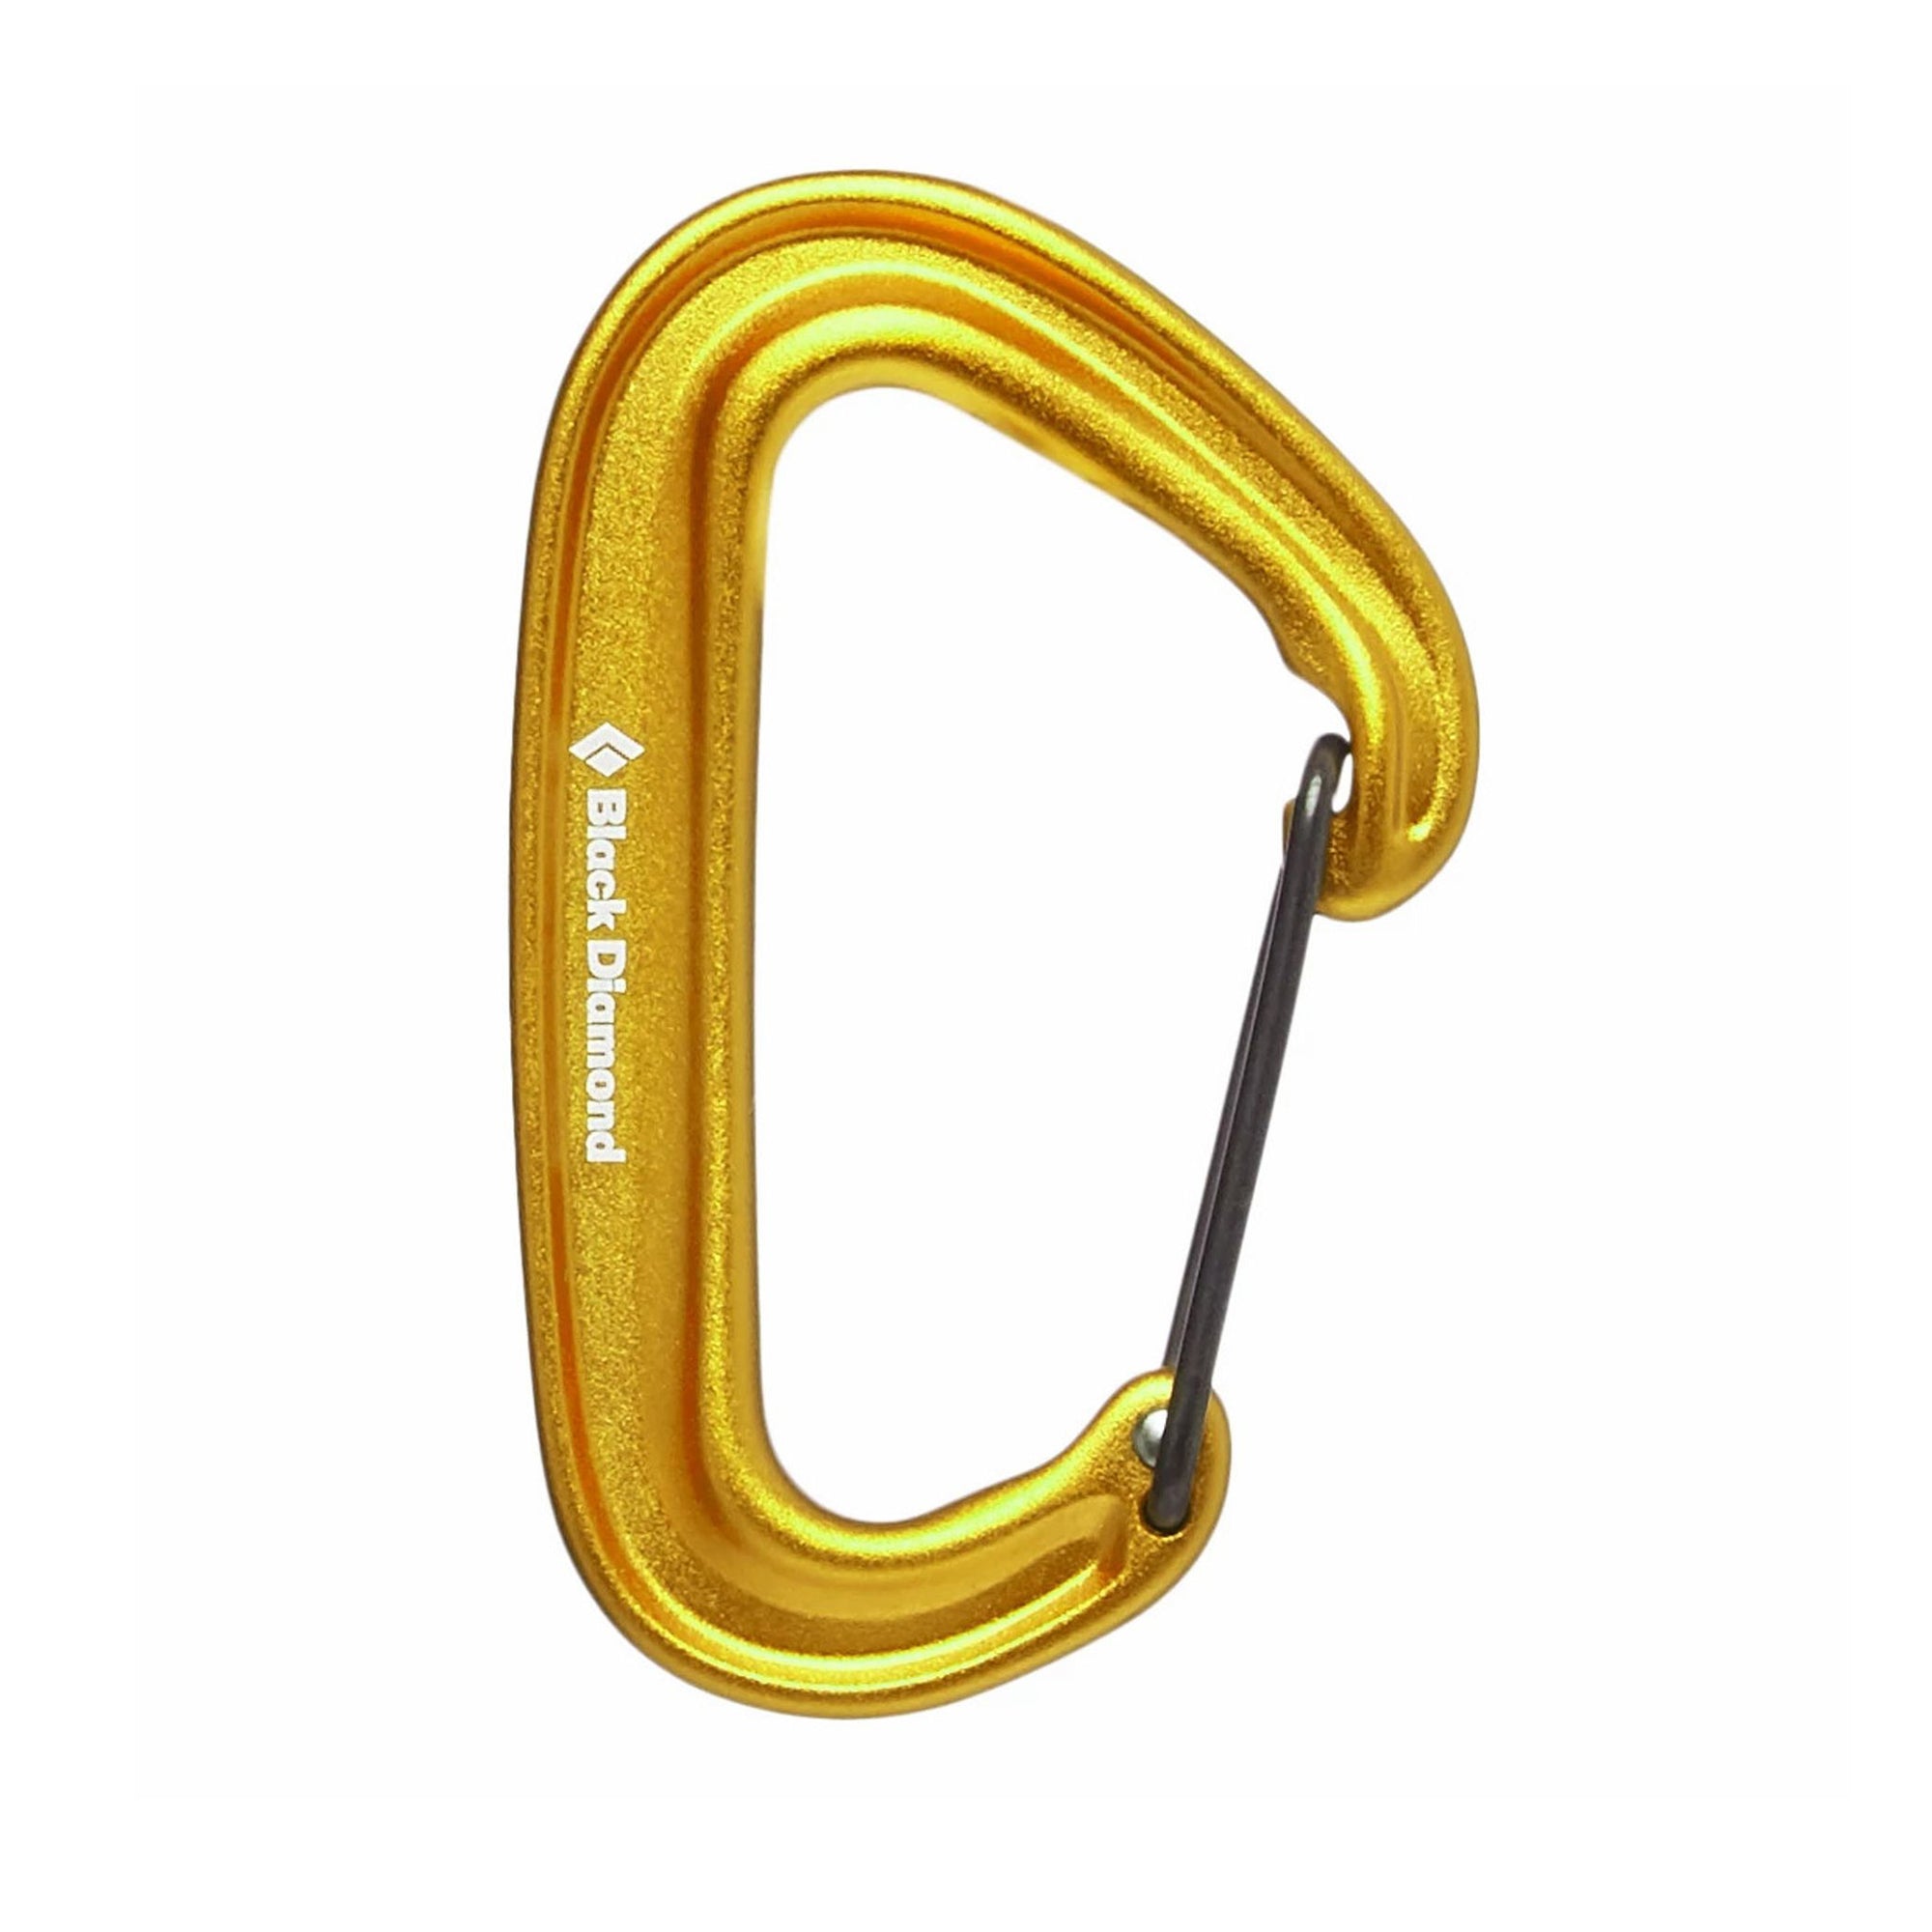 a yellow miniwire carabiner